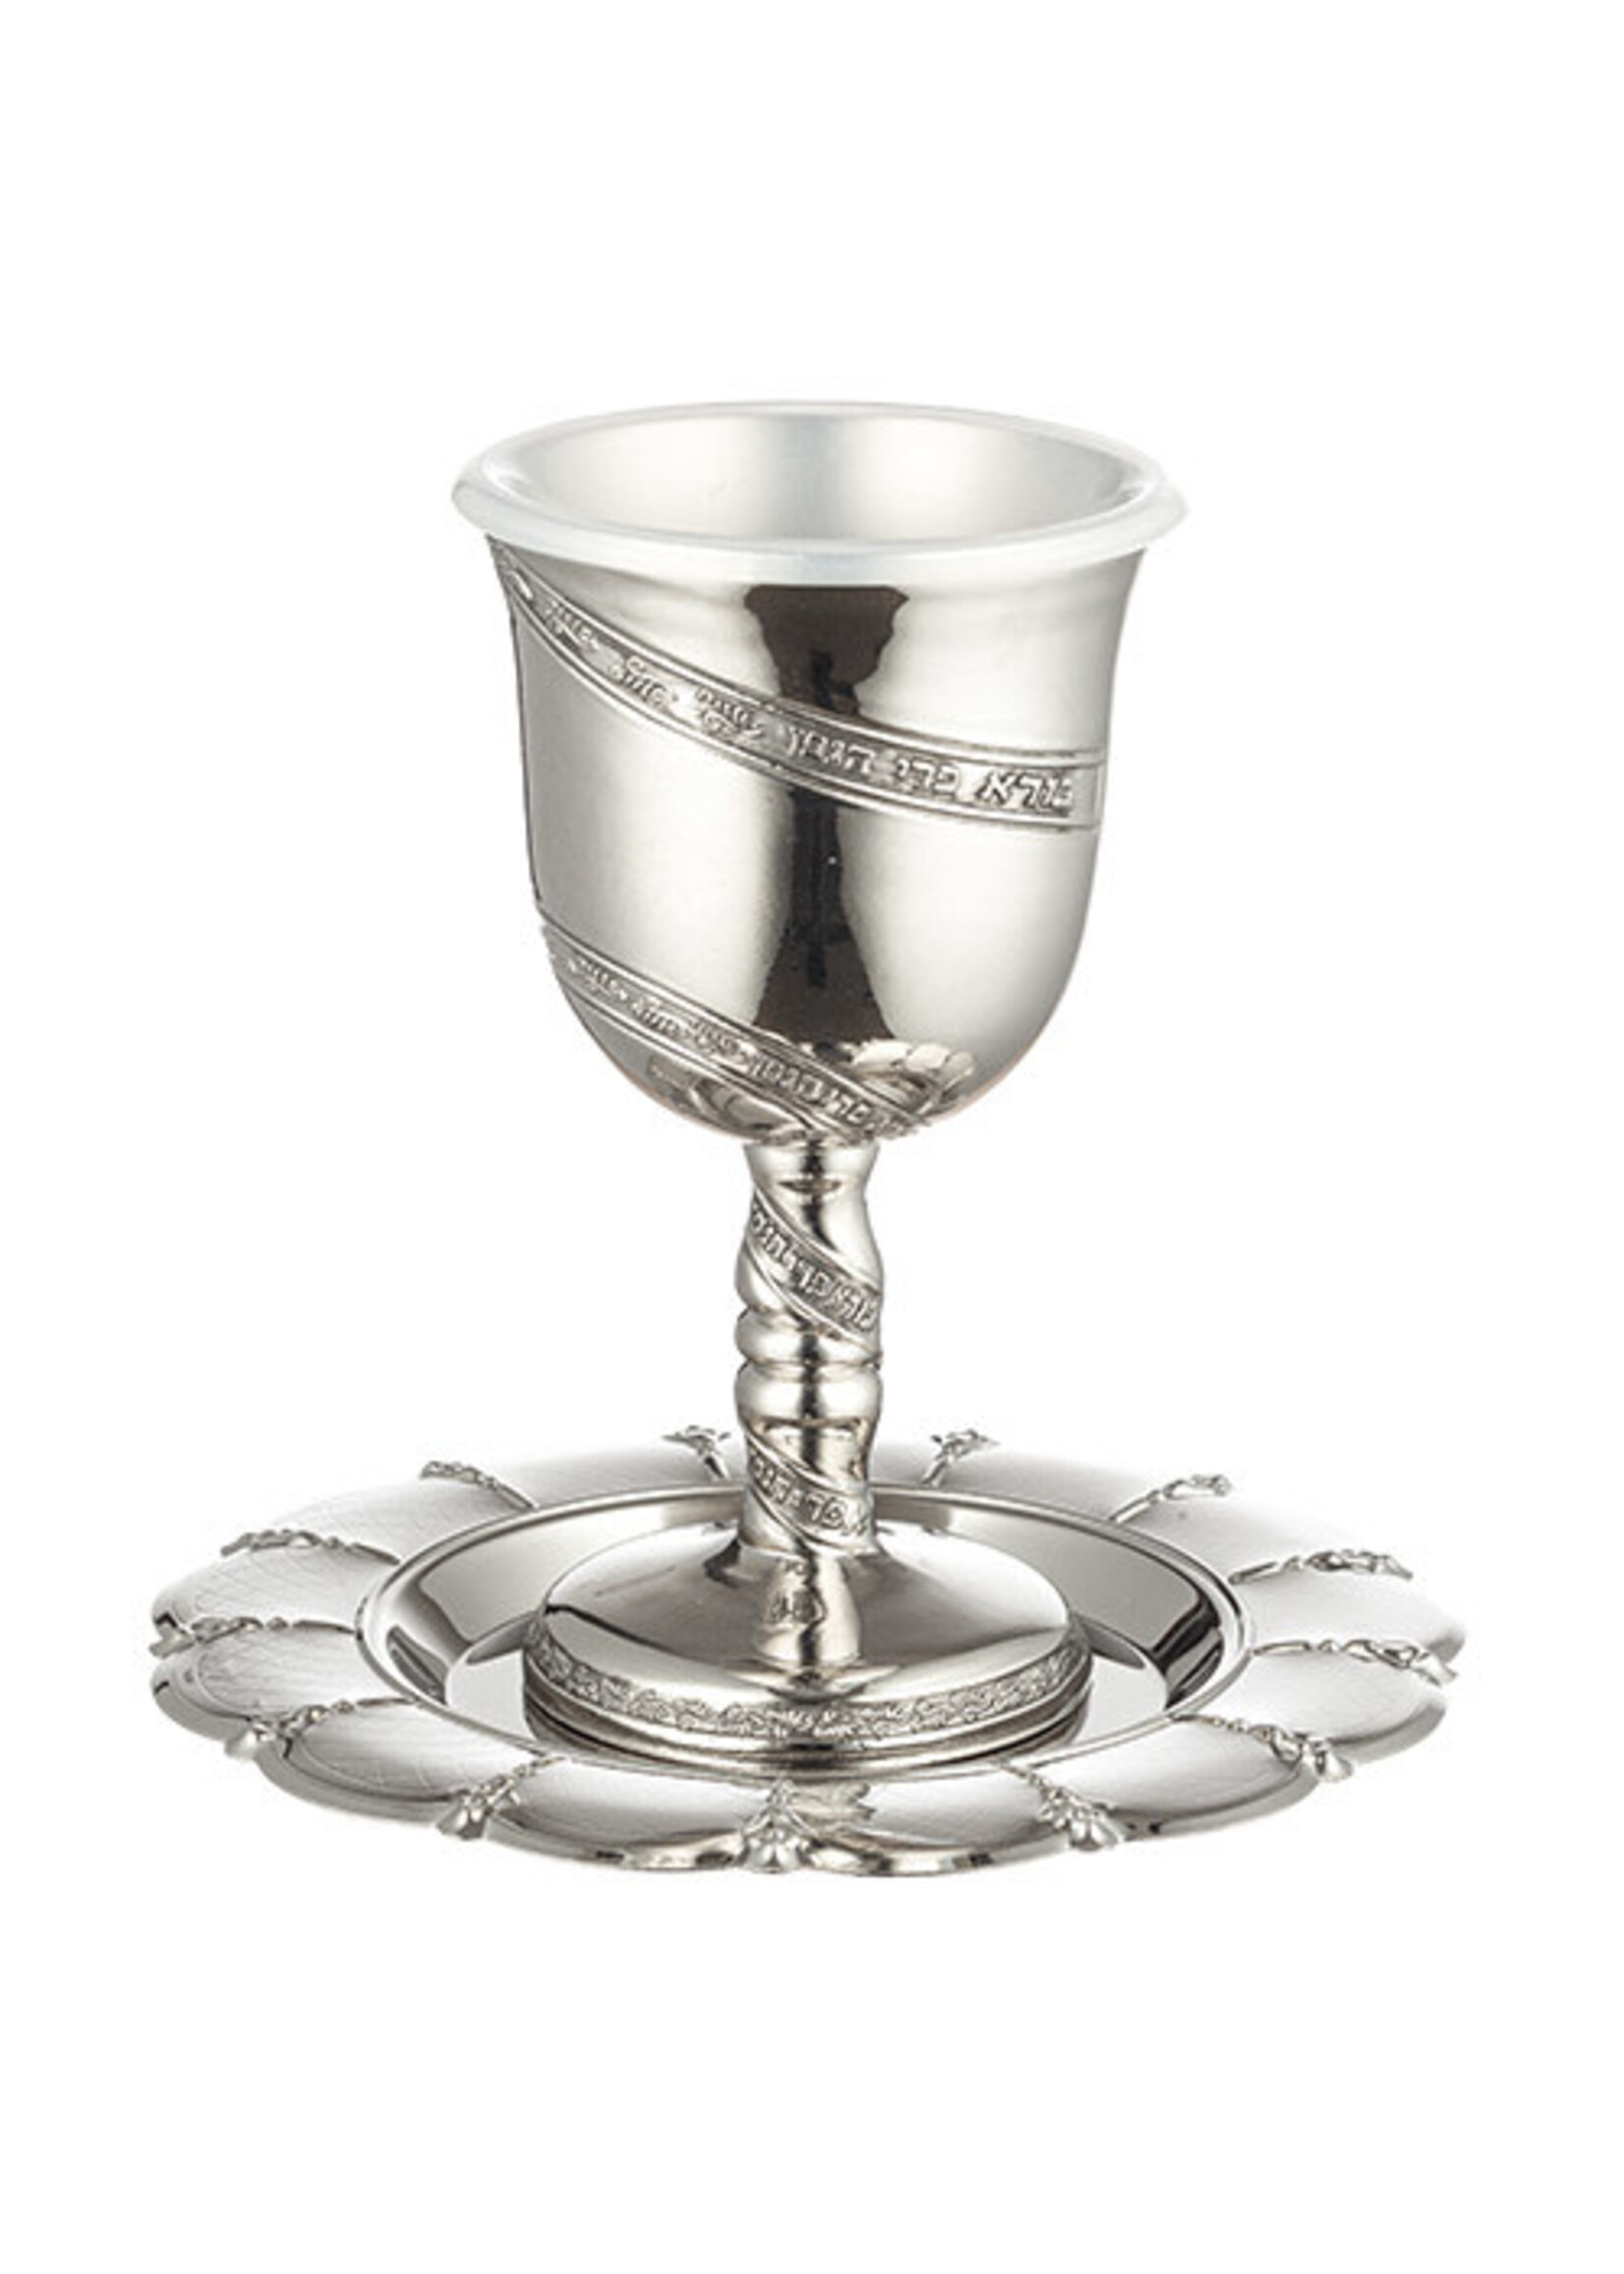 KIDDUSH CUP SET SILVER PLATED WITH BLESSING WRAPPED